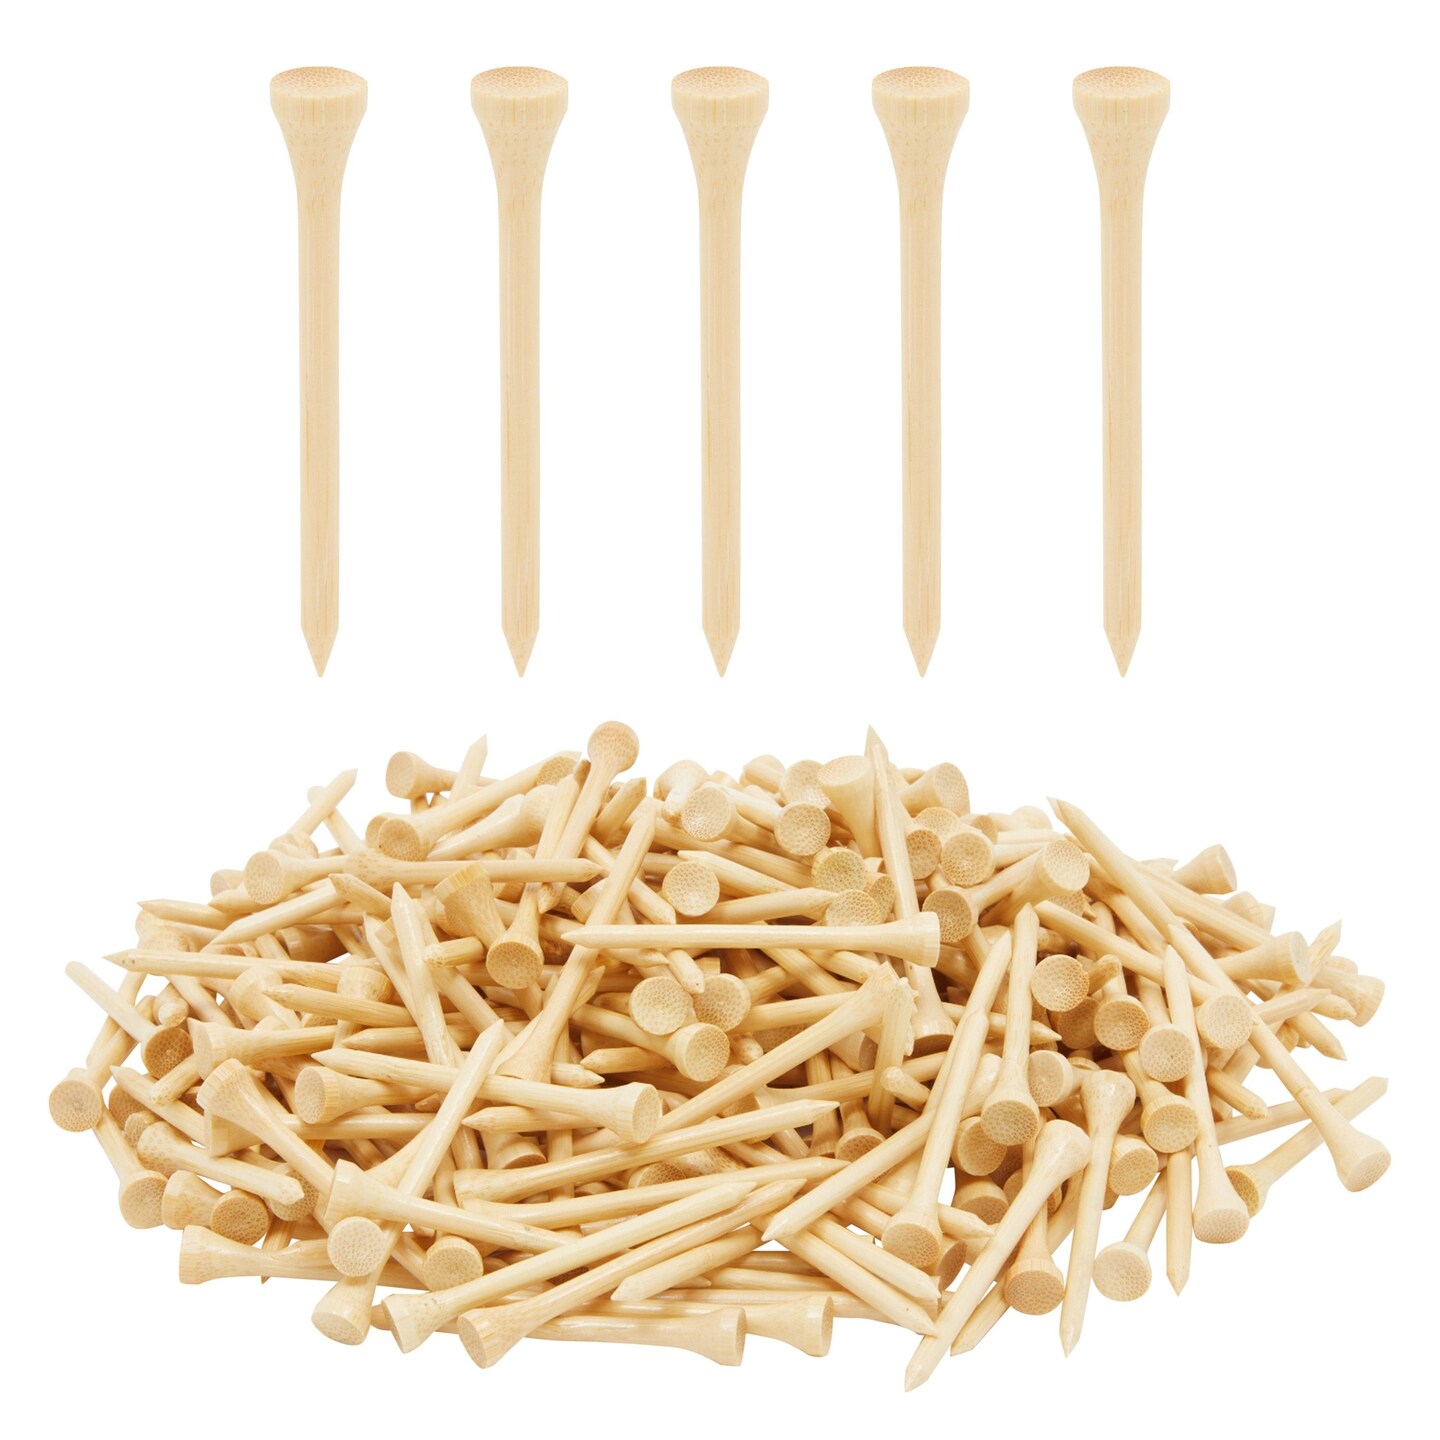 300-Pack Bulk Tall Wooden 2-3/4 Long Bamboo Golf Tees for Golf Club Courses, Country Club, Golfing Practice, Sports Tournaments, DIY Arts and Crafts (2.75 in, Natural Color)